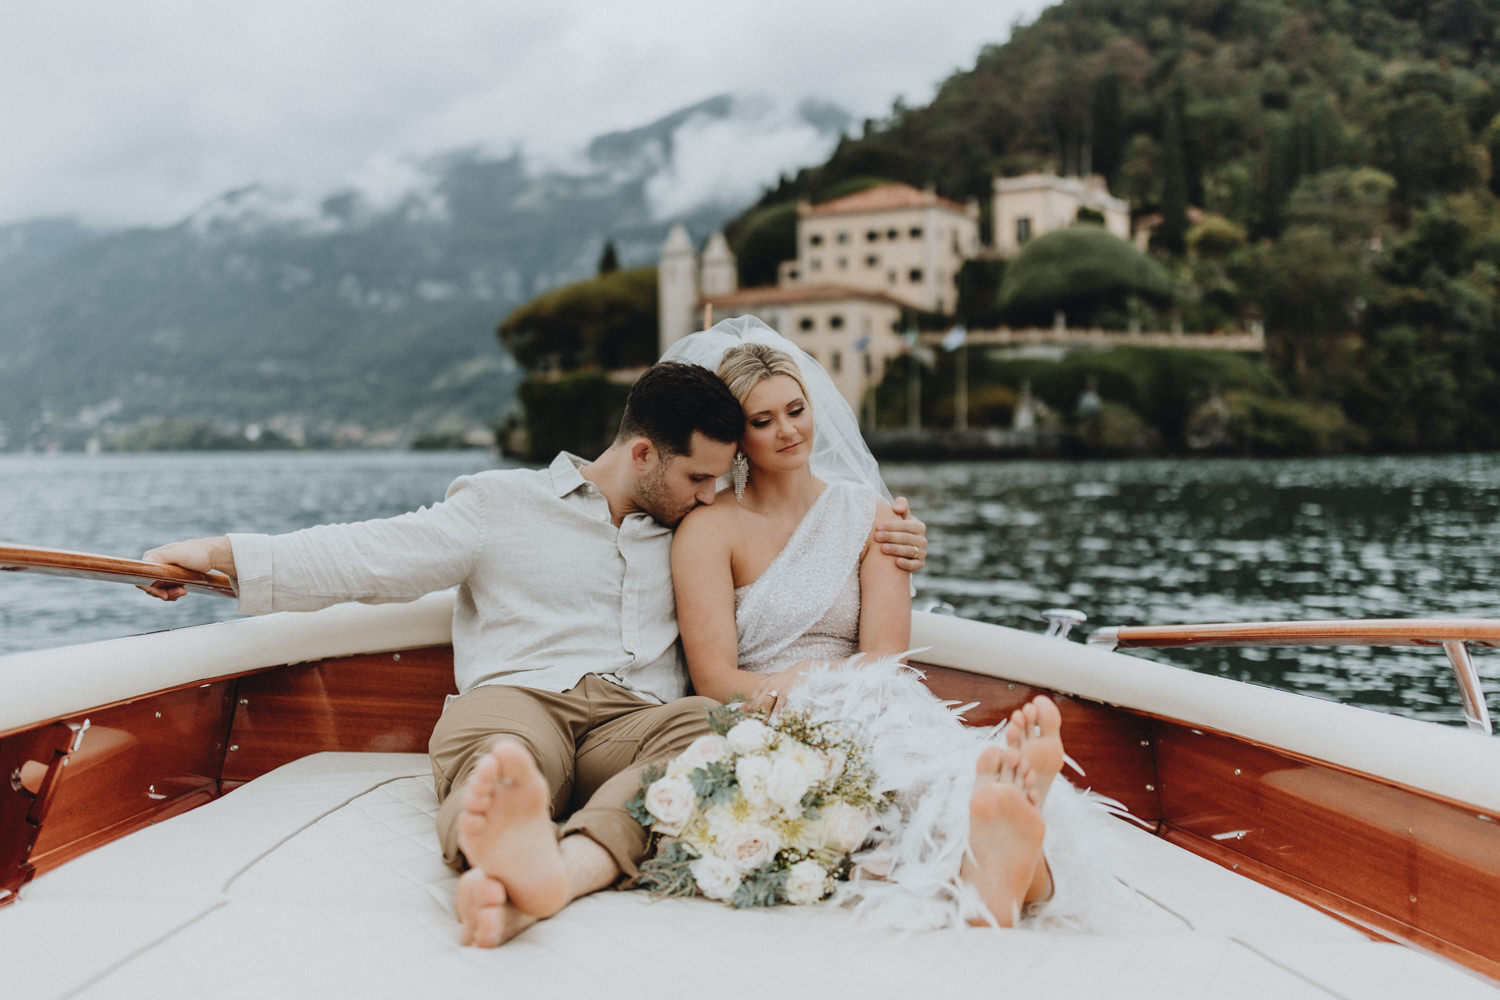 A couple in soft glam outfits sits on the back of a boat on Lake Como, framed by Villa Balbianello in the background on an overcast day